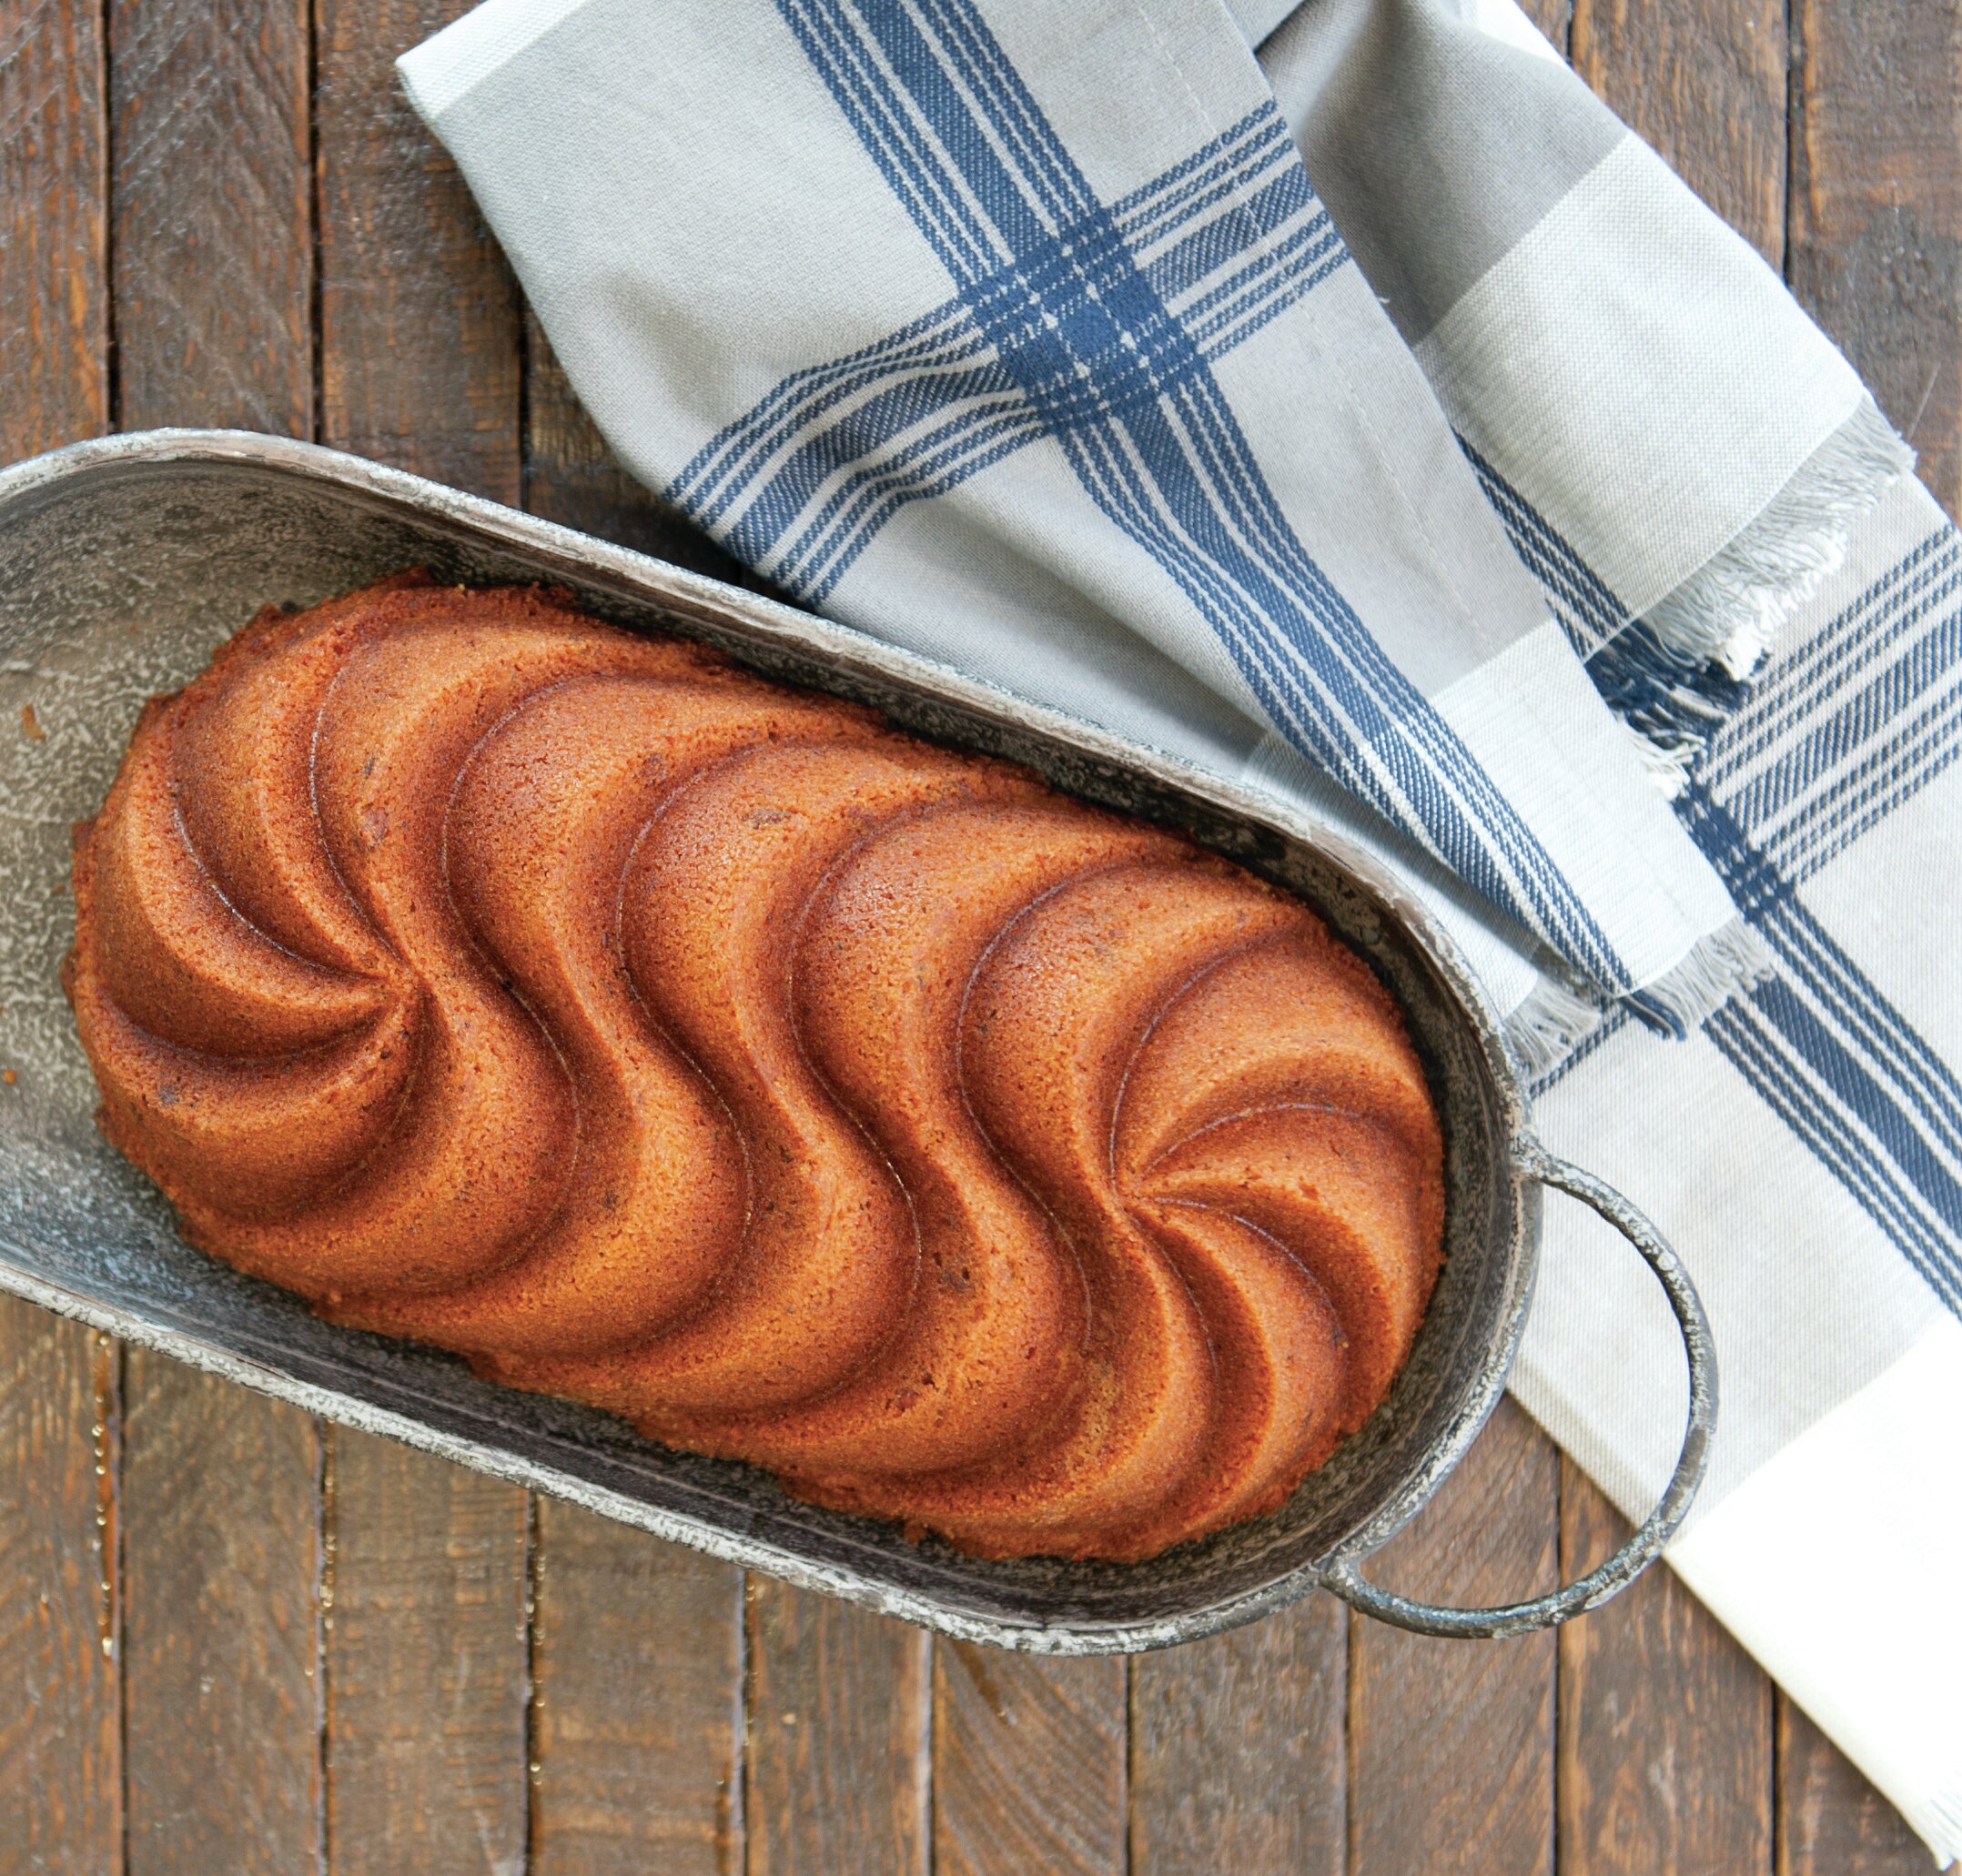 Nordic Ware Non-Stick Heritage Loaf Pan & Reviews